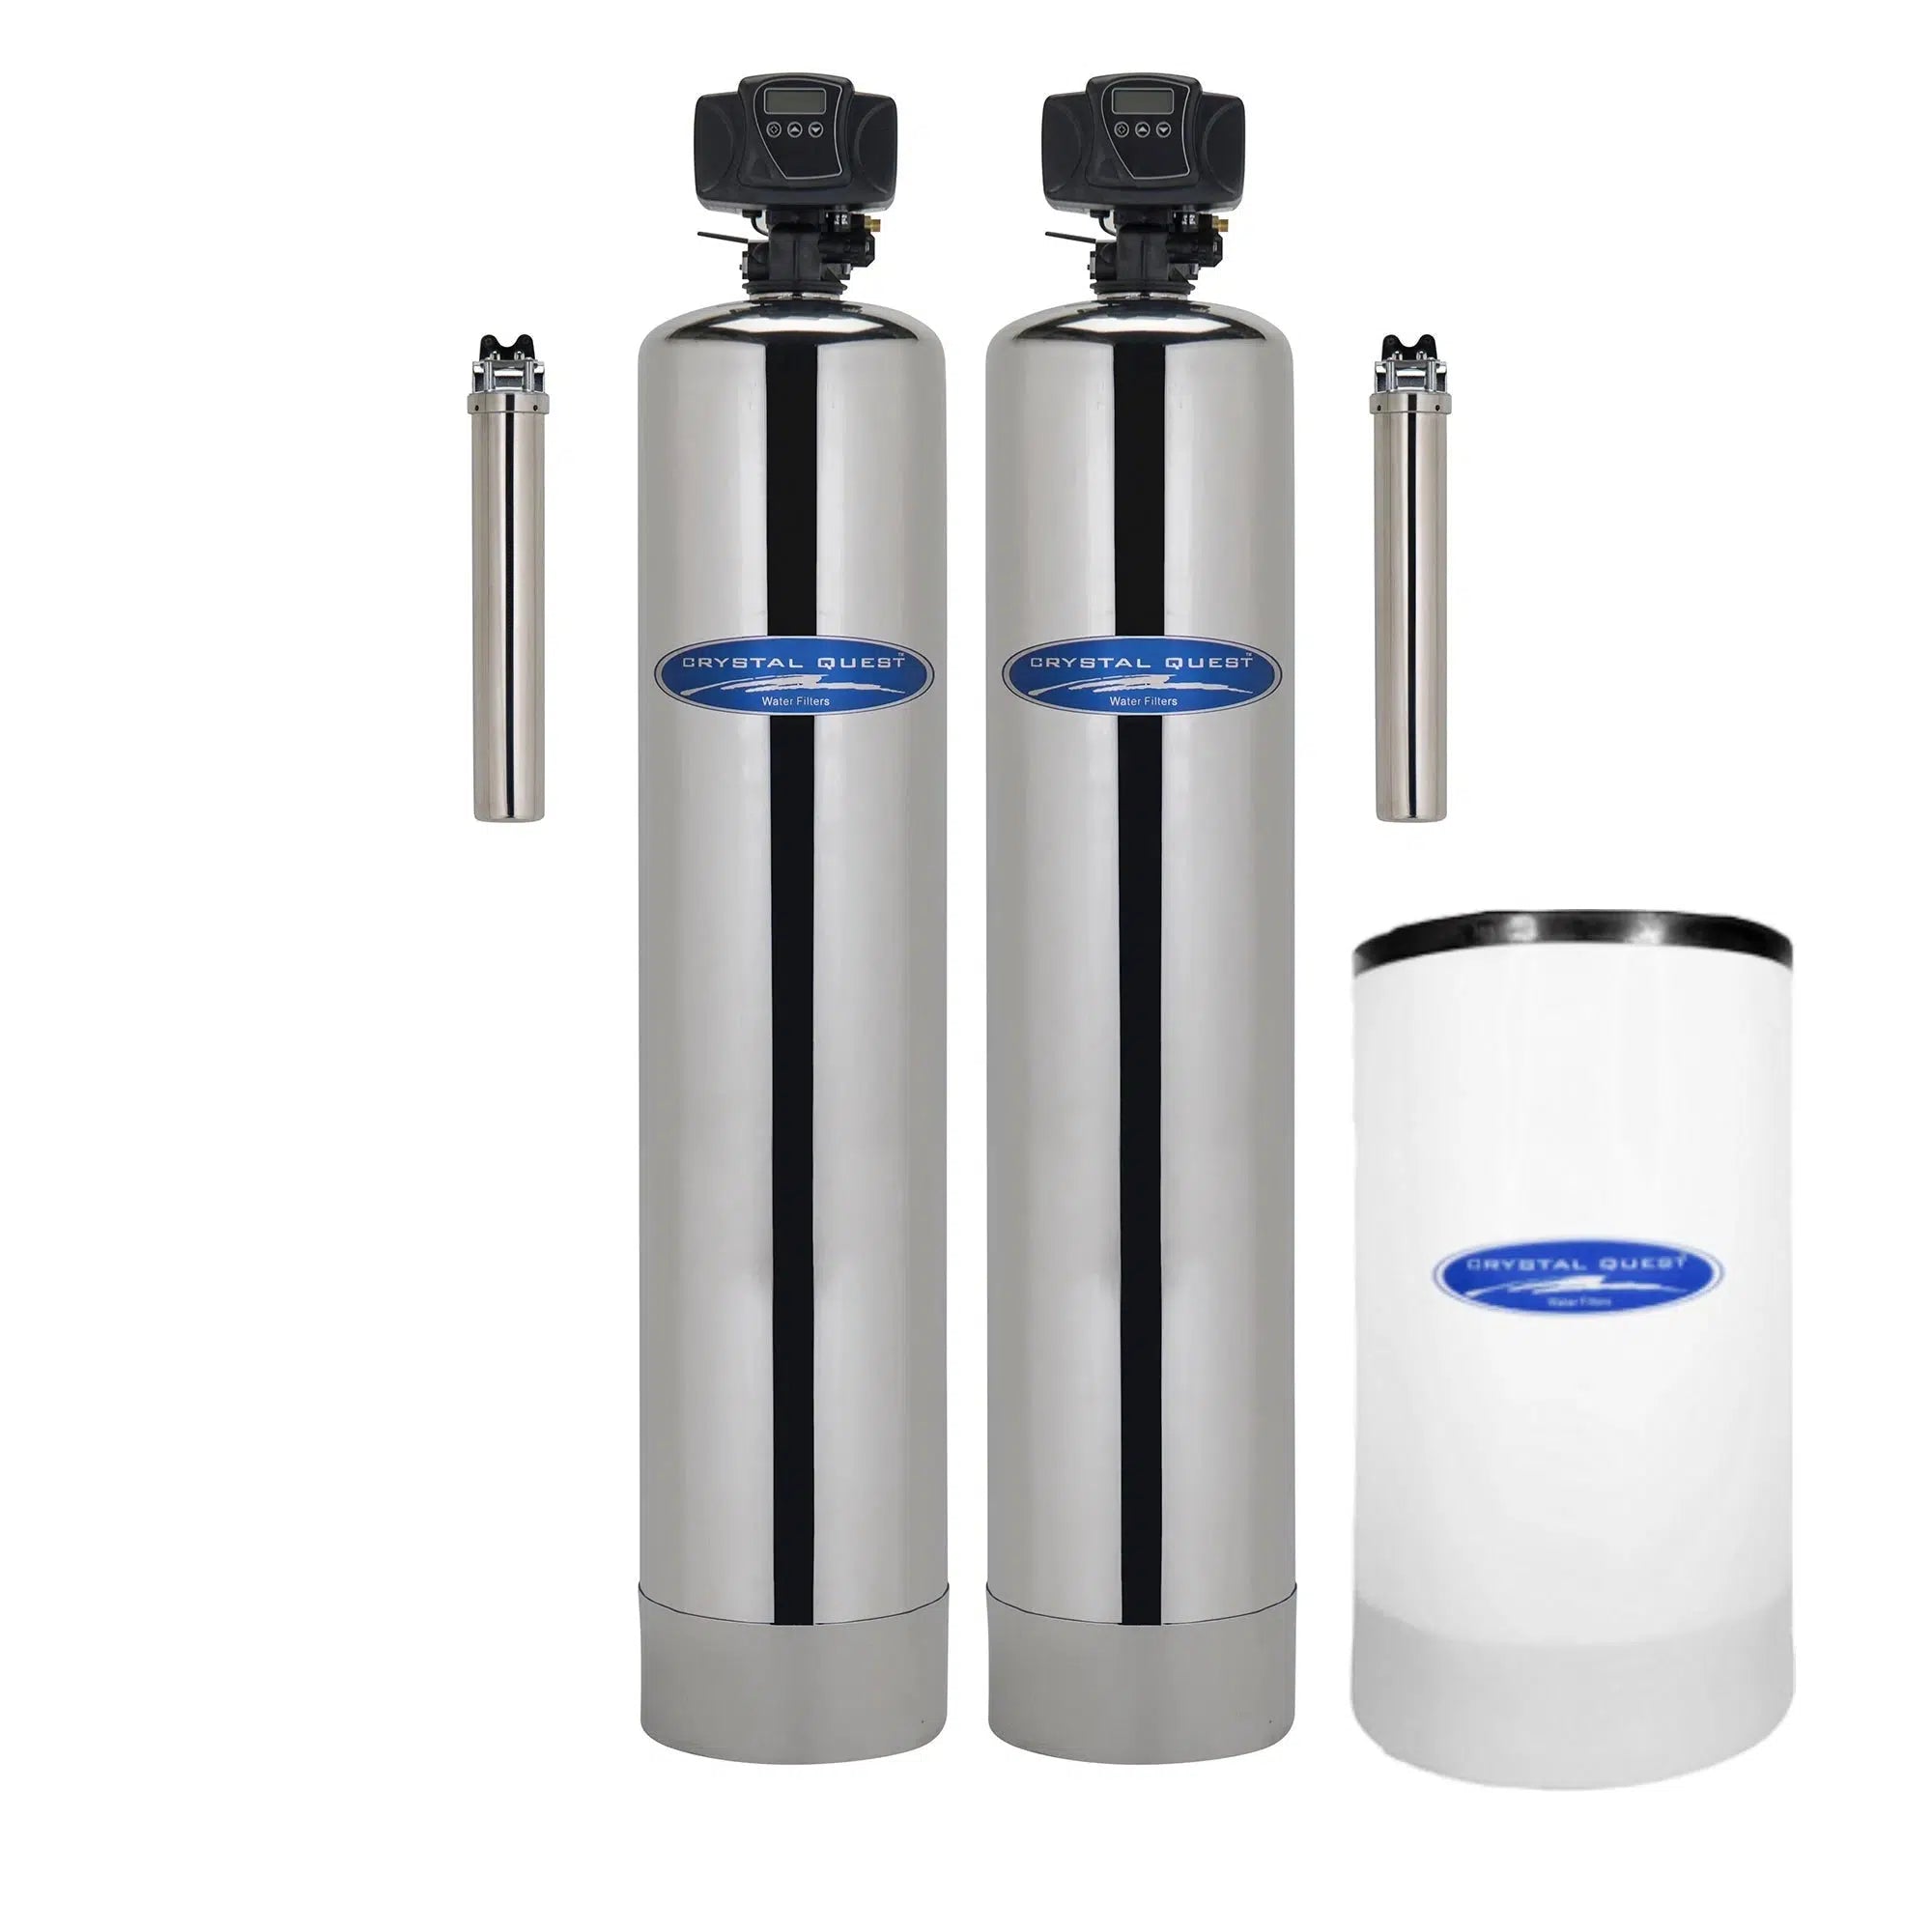 Crystal Quest Metal Removal Whole House Water Filter Stainless Steel